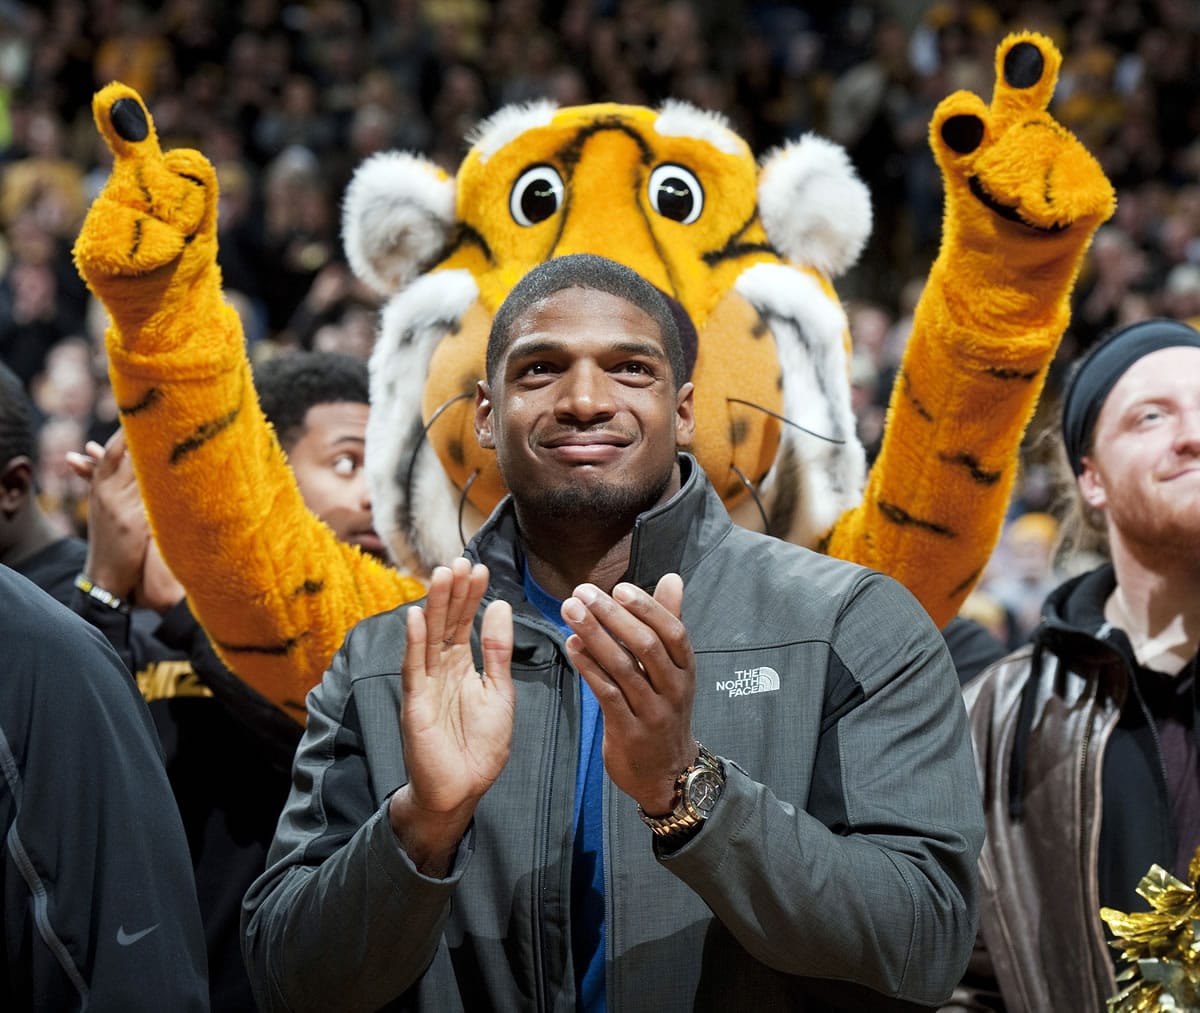 Missouri's All-American defensive end Michael Sam claps during the Cotton Bowl trophy presentation at halftime of an NCAA college basketball game between Missouri and Tennessee, Saturday, Feb. 15, 2014, in Columbia, Mo. Sam came out to the entire country Sunday, Feb. 9, and could become the first openly gay player in the NFL. (AP Photo/L.G.